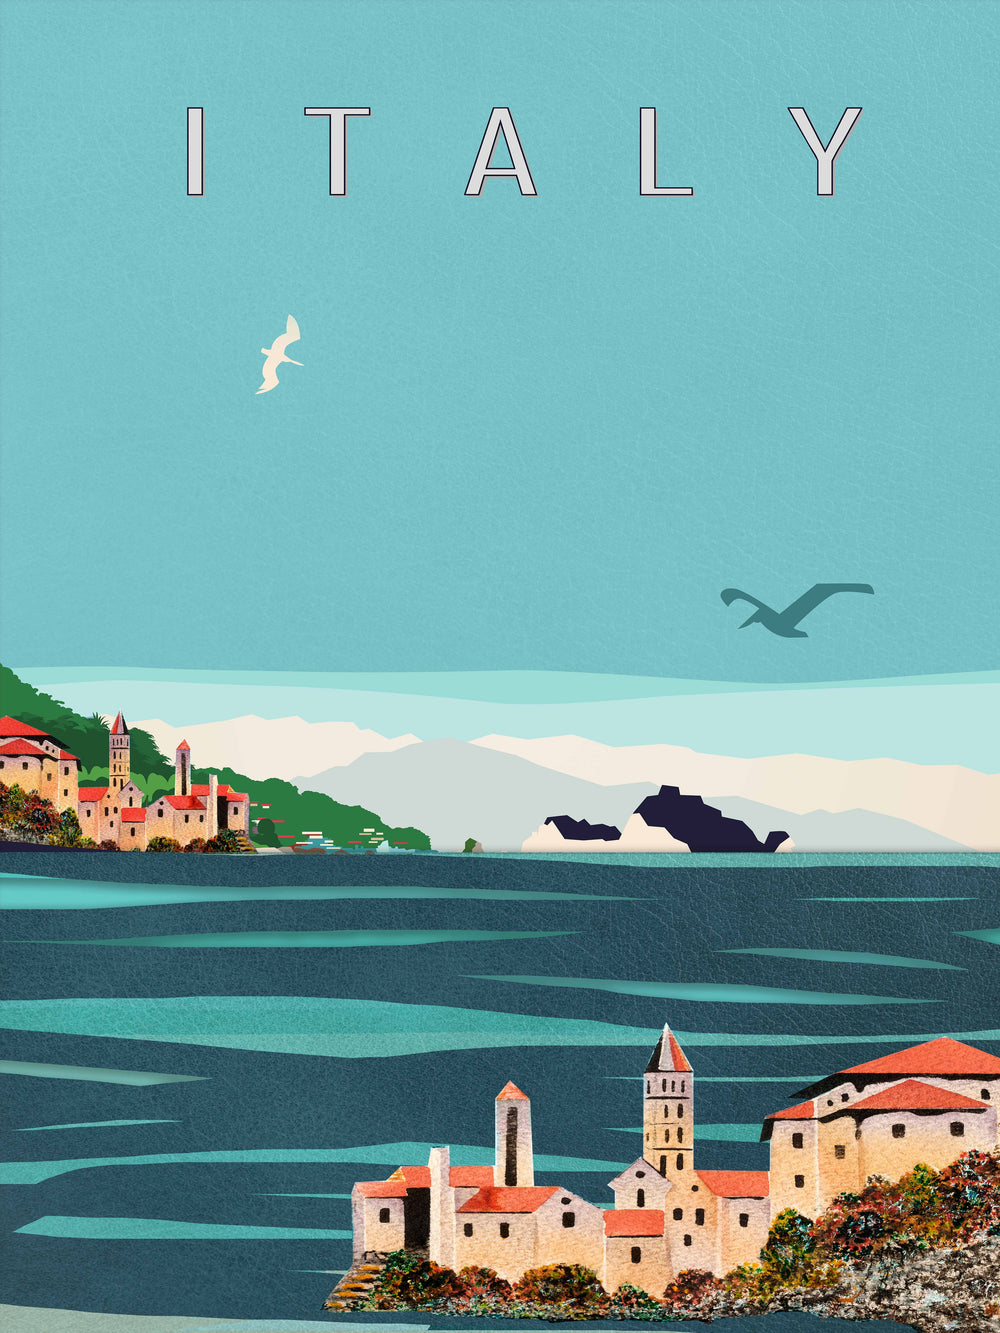 Italy Travel Poster